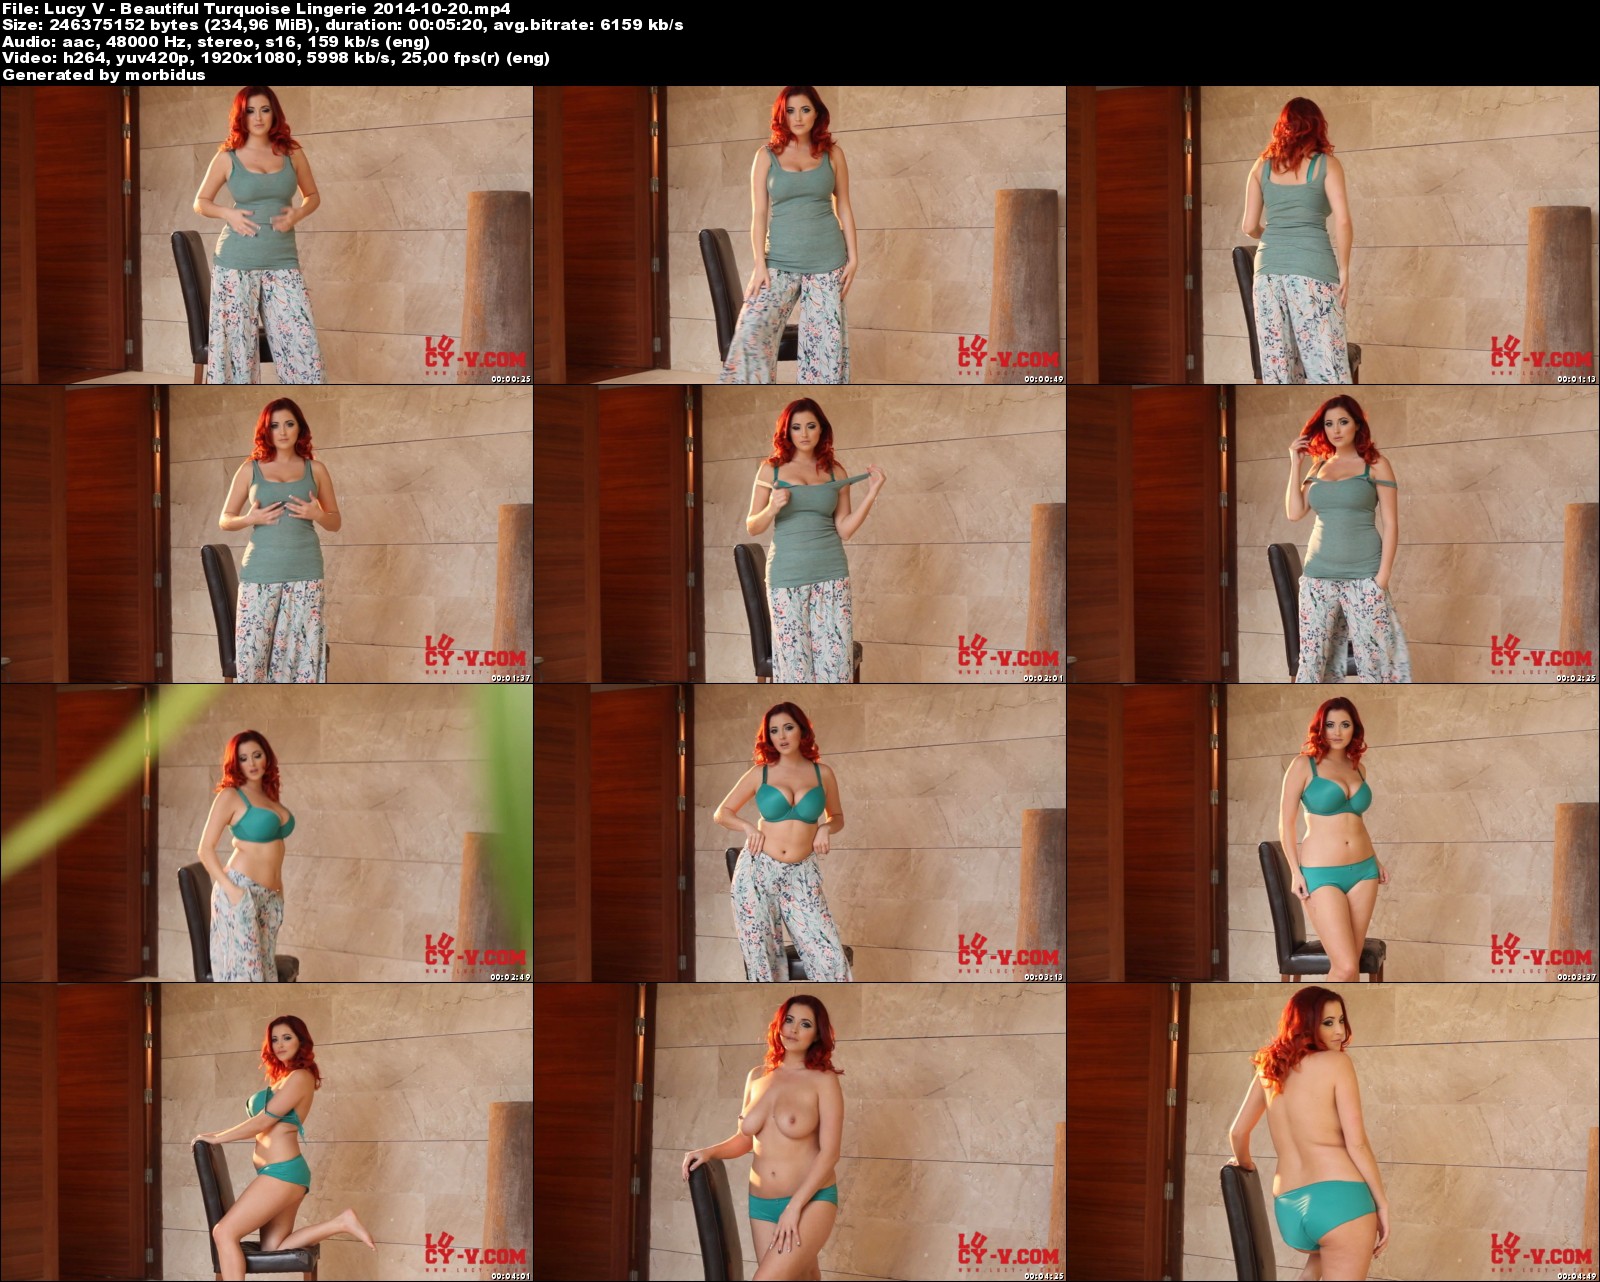 Lucy_V_-_Beautiful_Turquoise_Lingerie_2014-10-20.jpeg